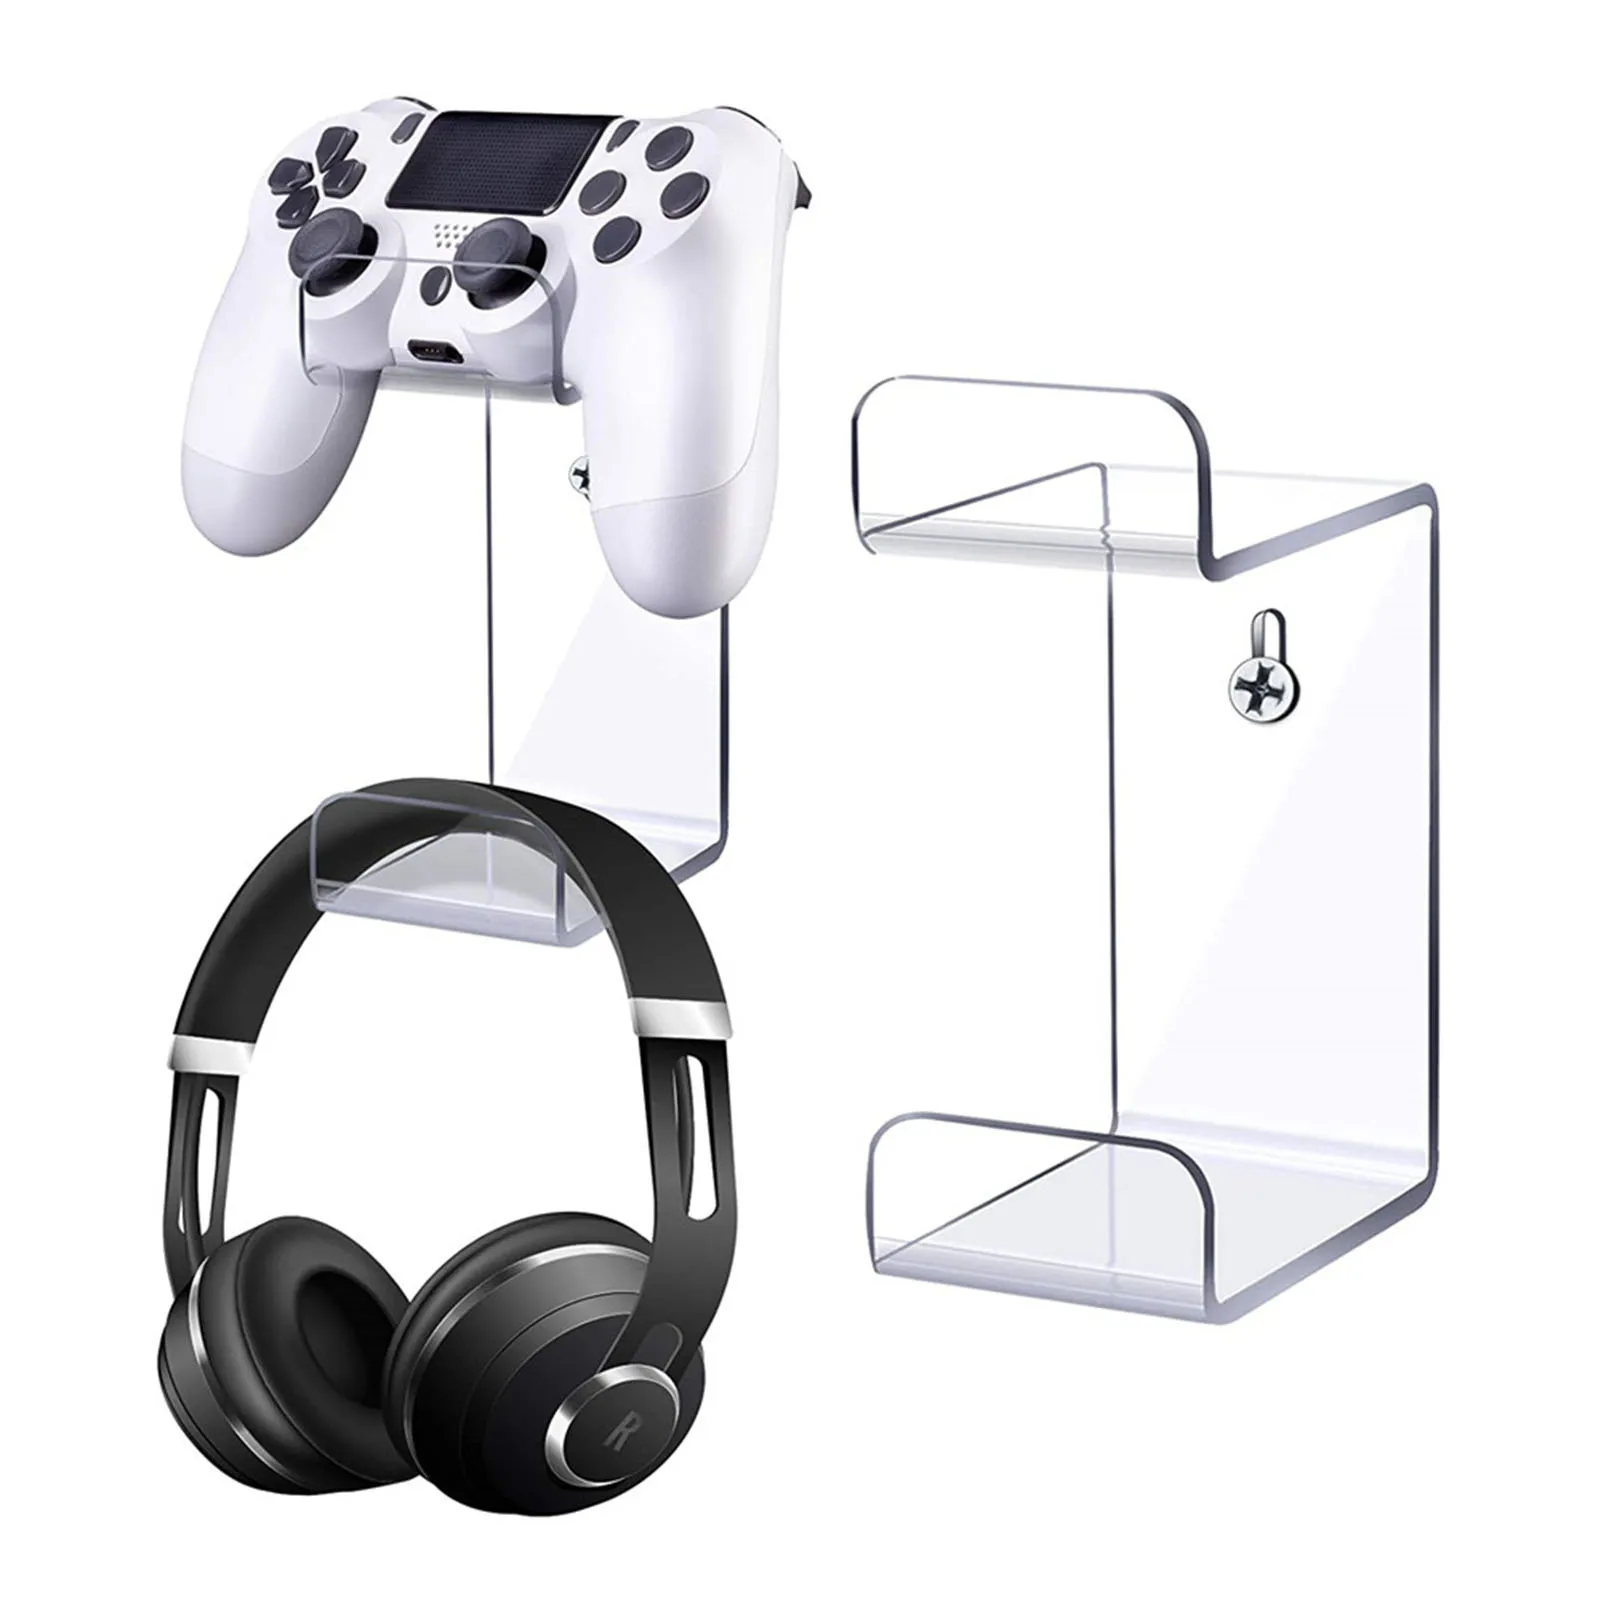 

2pcs Acrylic Headphone Hanger Holder Wall Mount Headset Stand Display Bracket For PS5 XBOX Controllers Headphone Hanging Hook